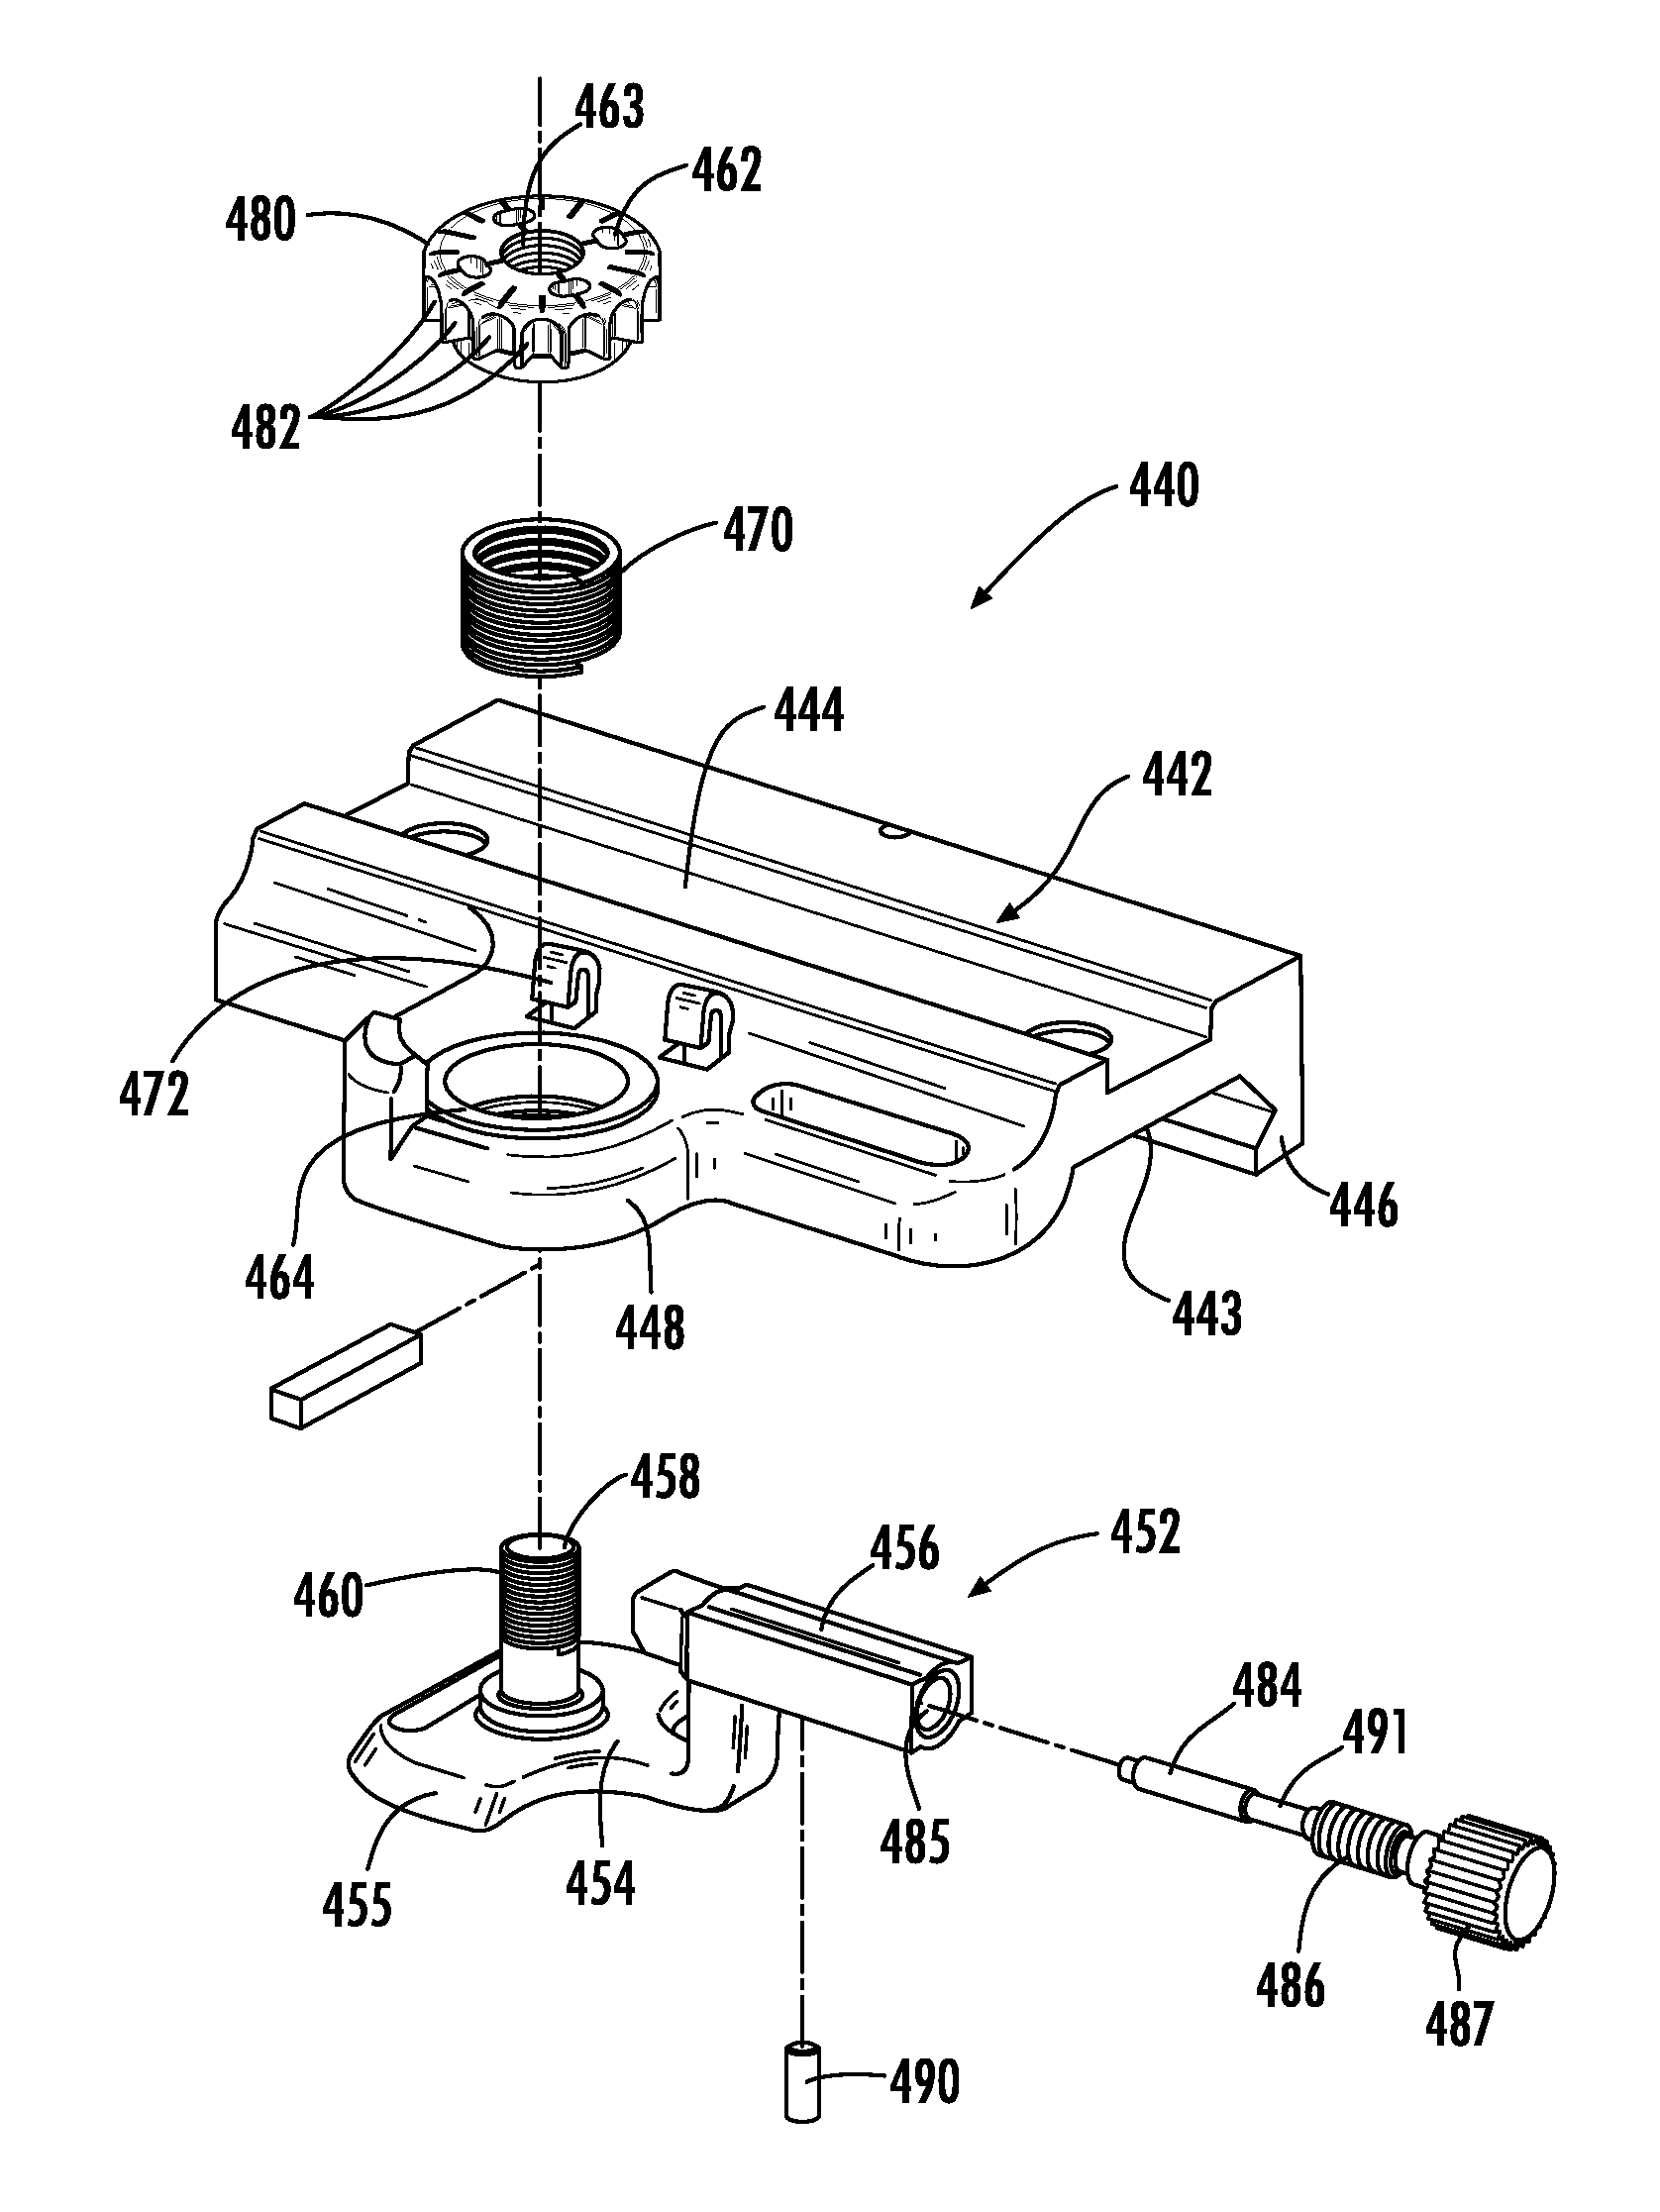 Mounting assembly with adjustable spring tension